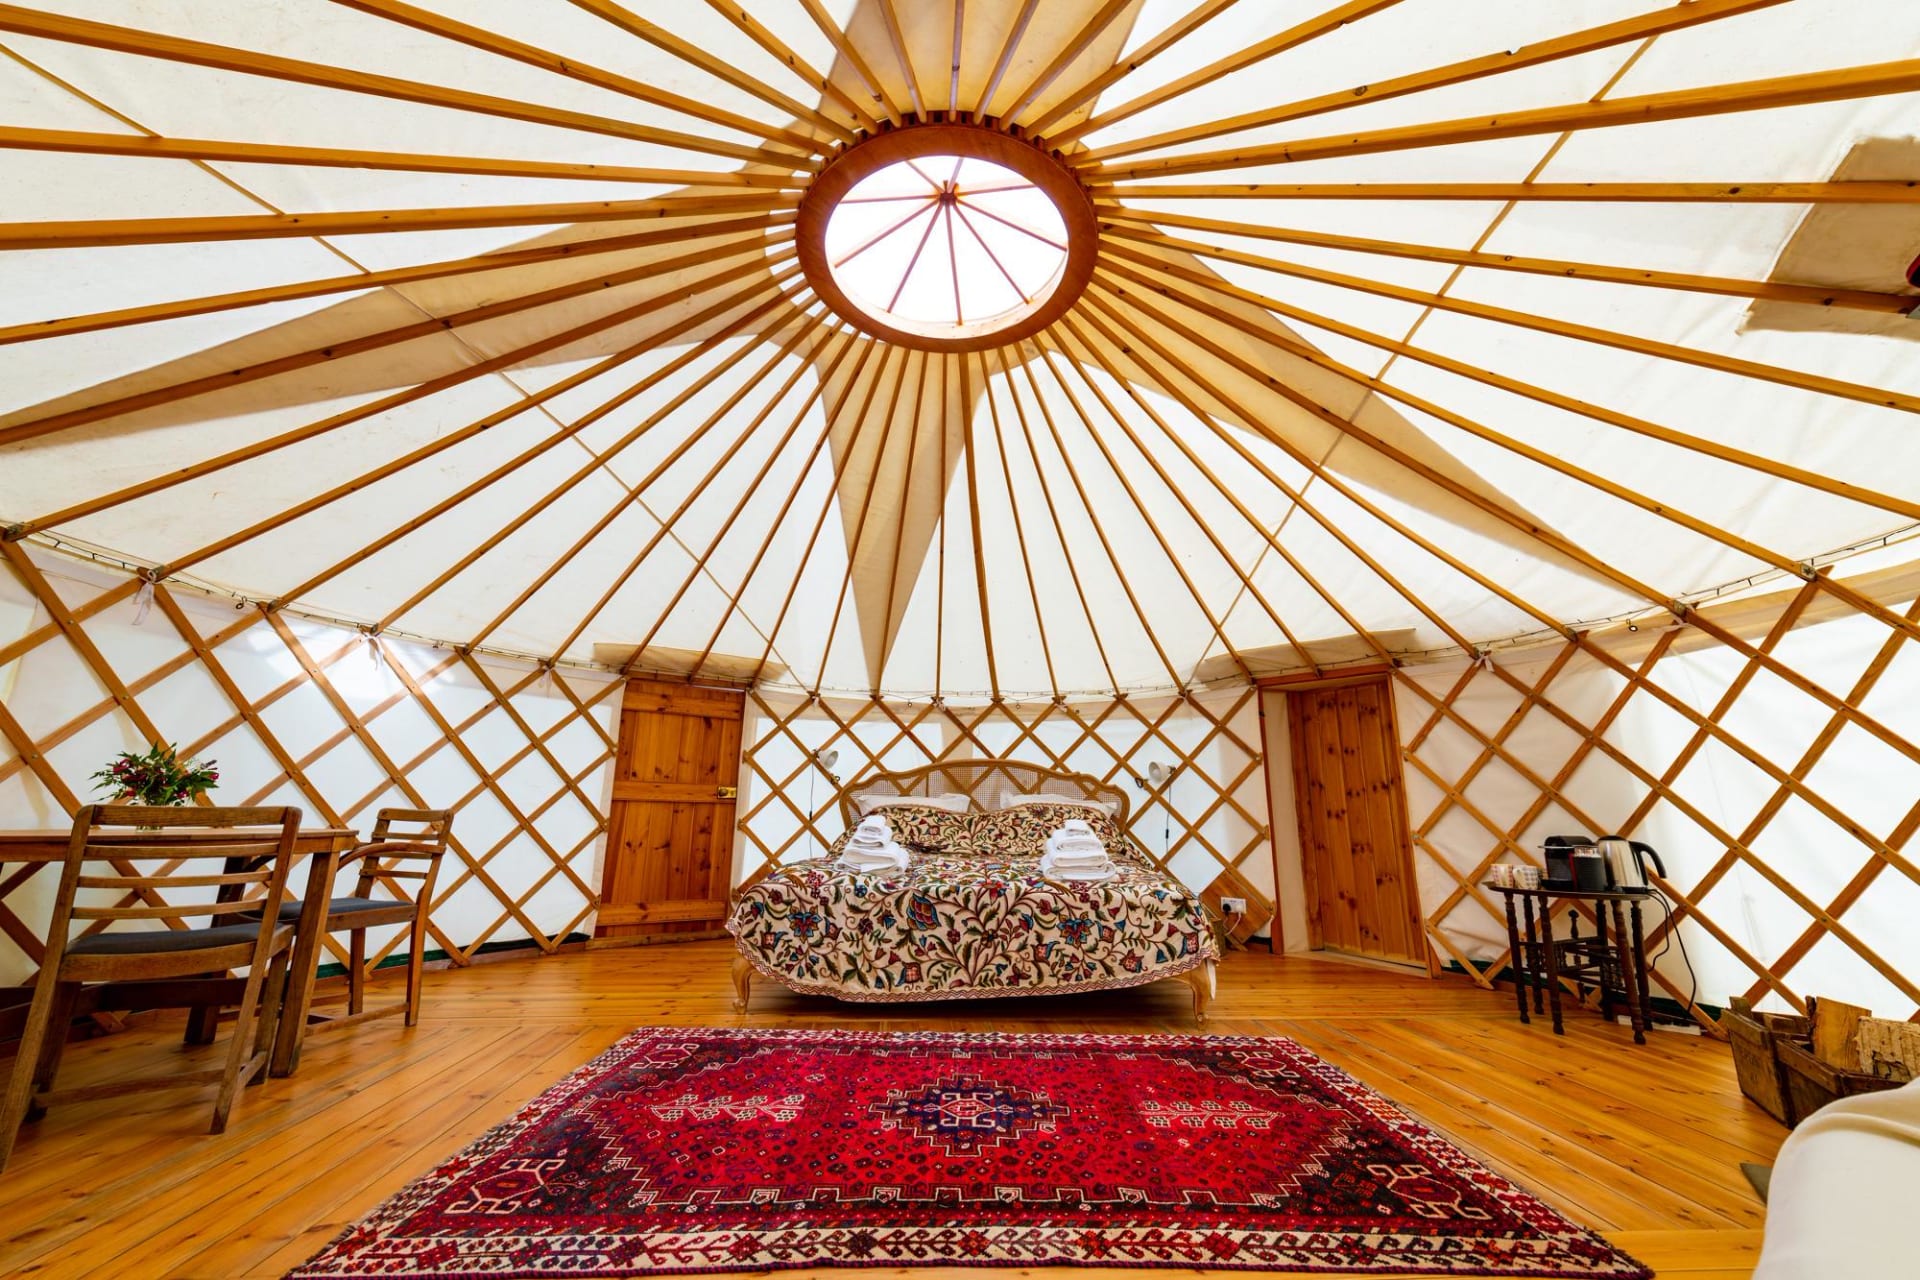 The luxury en suite yurts at Walnut Farm Glamping are airy and comfortable.